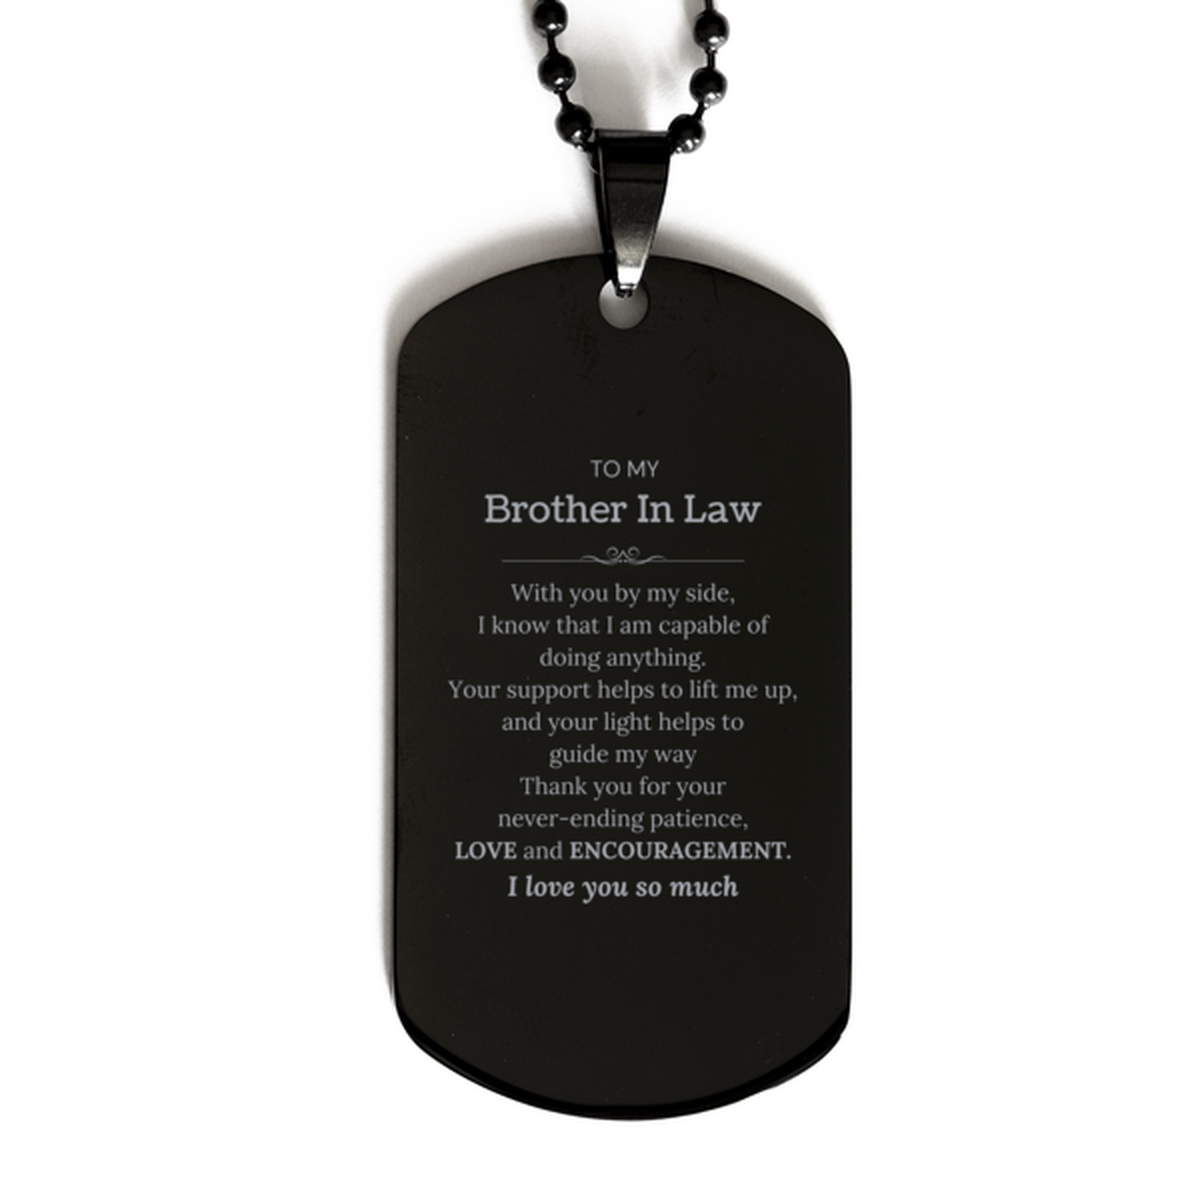 Appreciation Brother In Law Black Dog Tag Gifts, To My Brother In Law Birthday Christmas Wedding Keepsake Gifts for Brother In Law With you by my side, I know that I am capable of doing anything. I love you so much